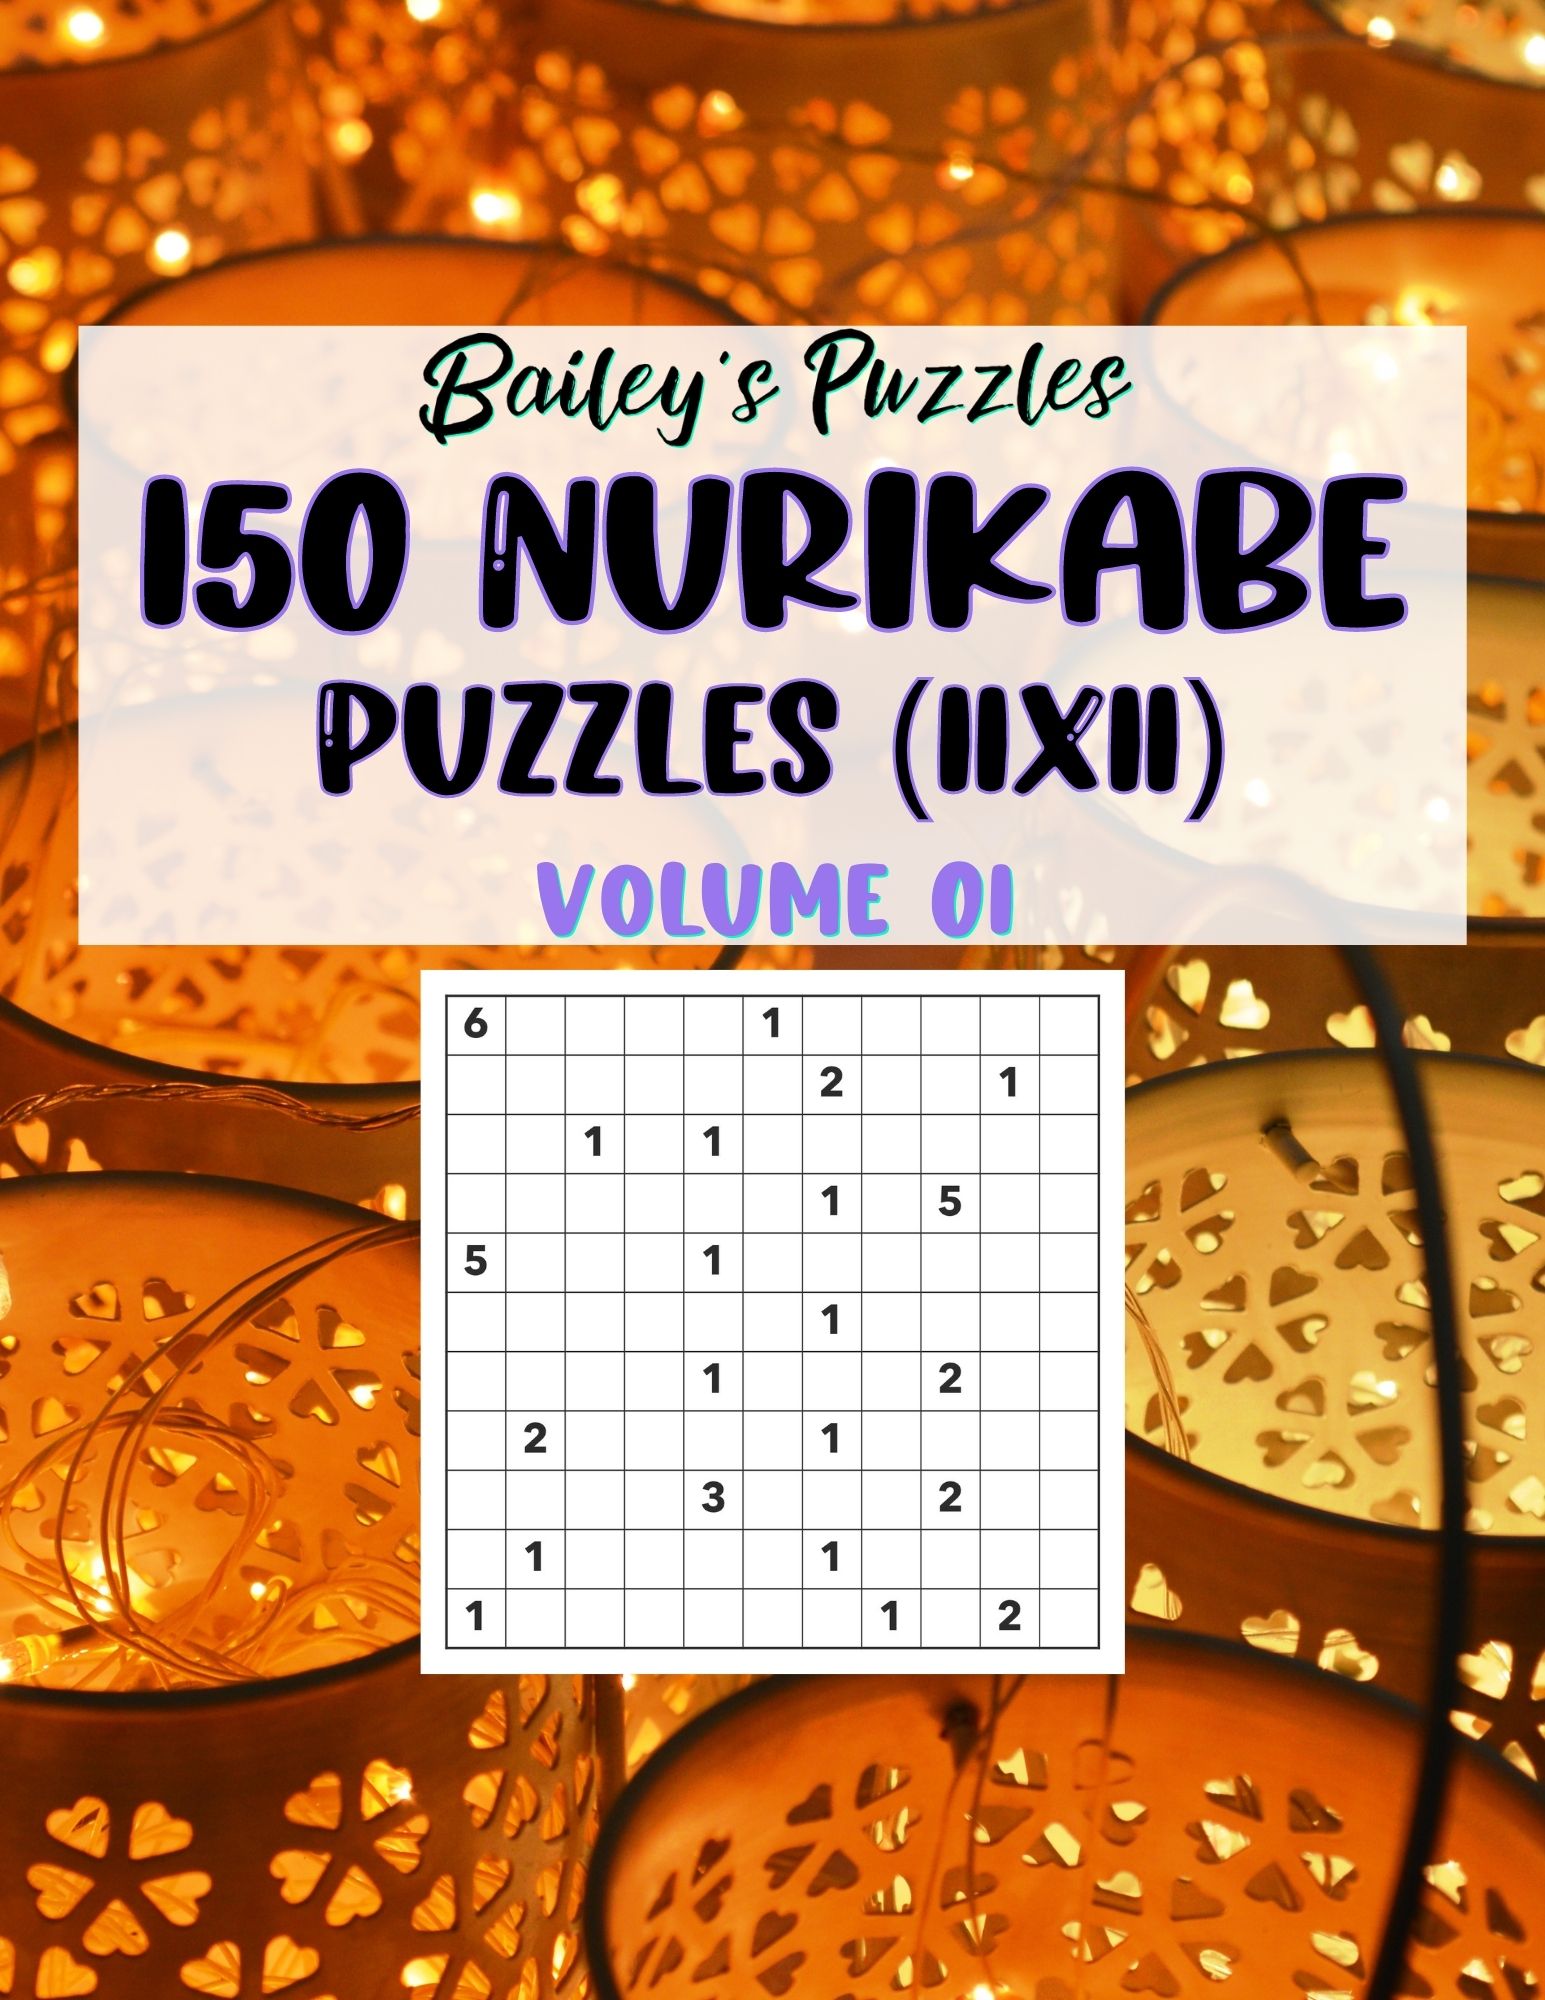 Front Cover - 150 Nurikabe Puzzles (11x11)